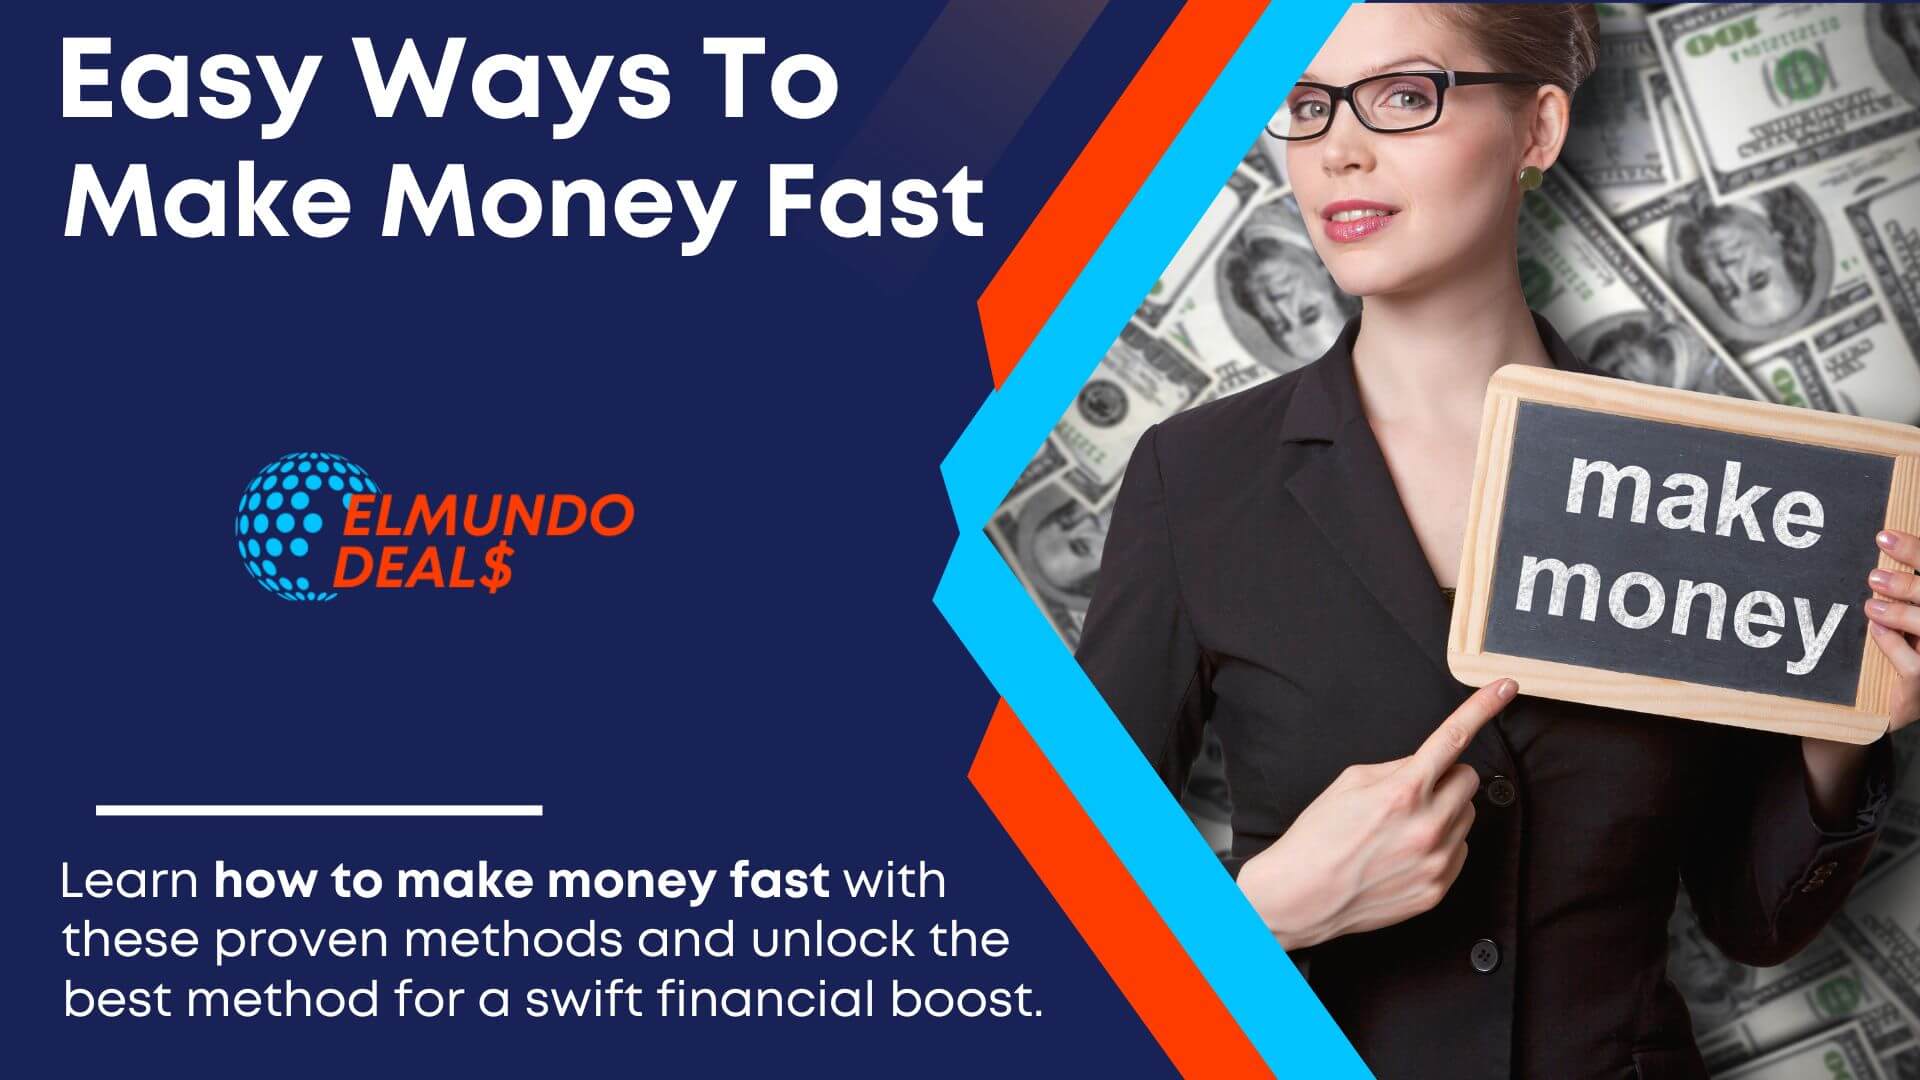 13 Easy Ways To Make Money Quickly: How To Make Money Fast